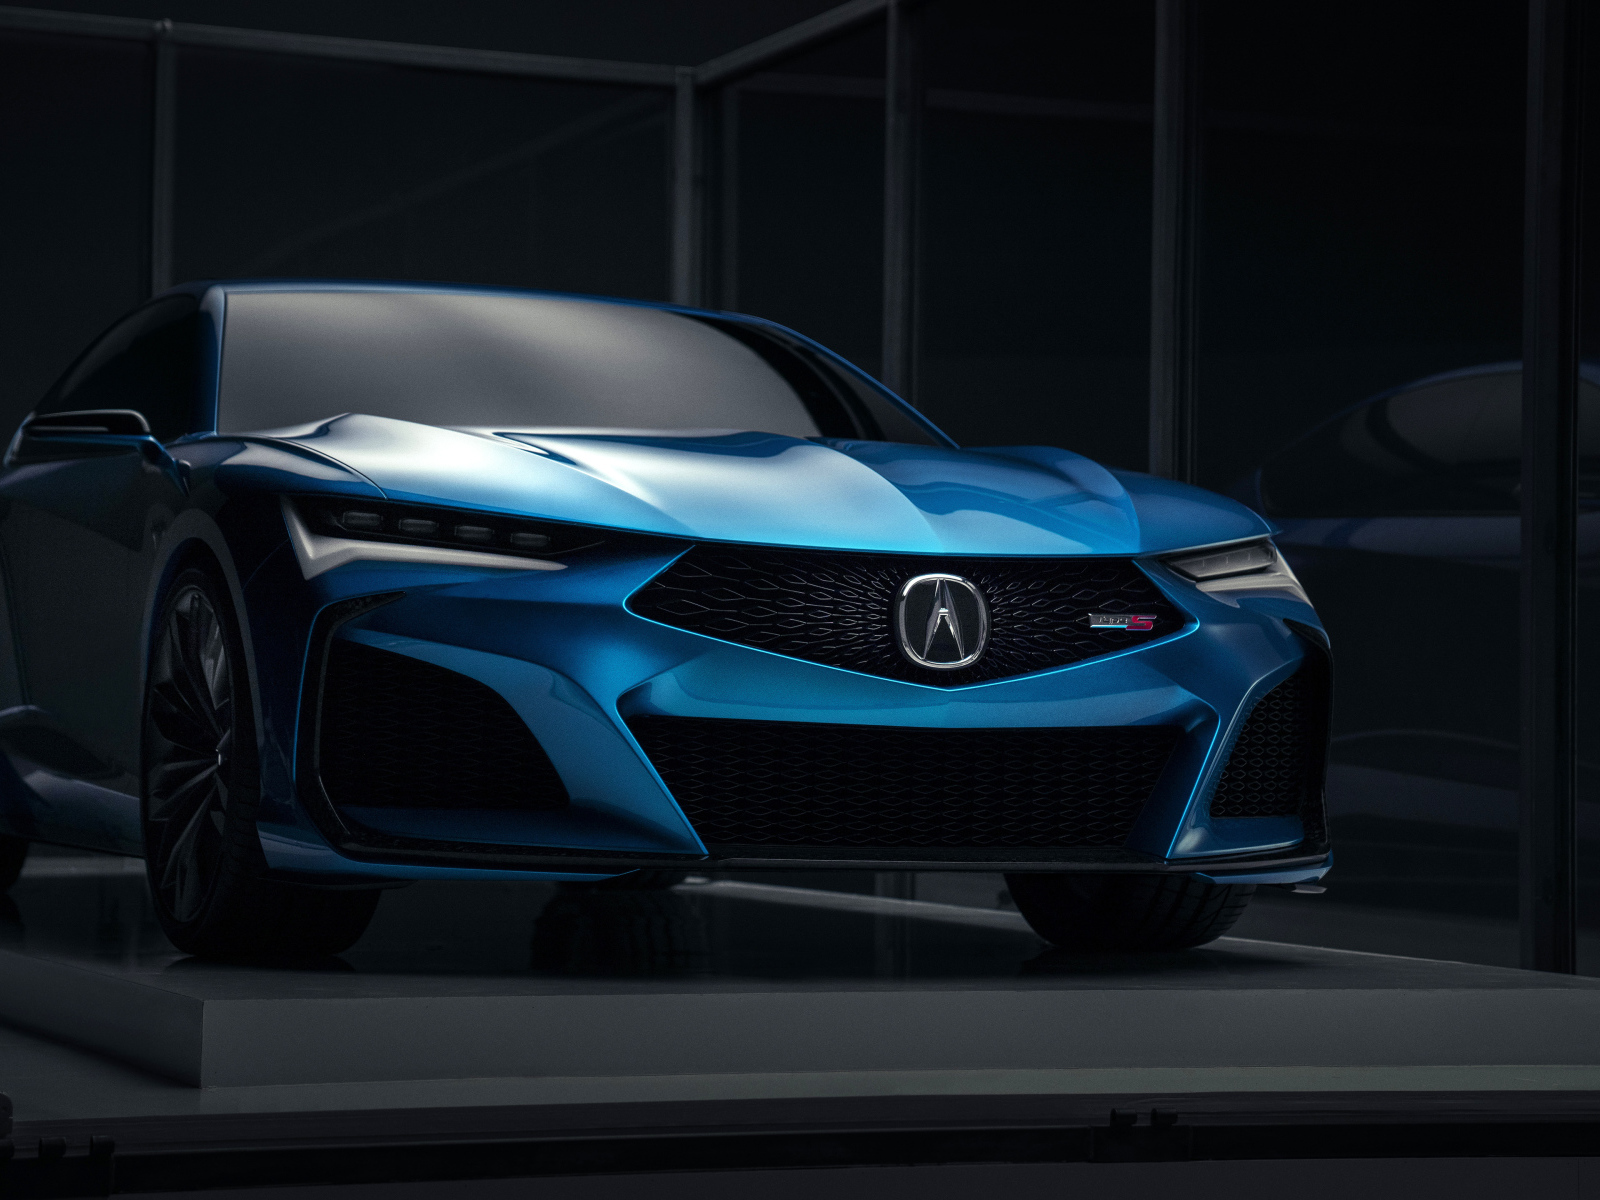 Blue 2019 Acura Type S Concept car at presentation